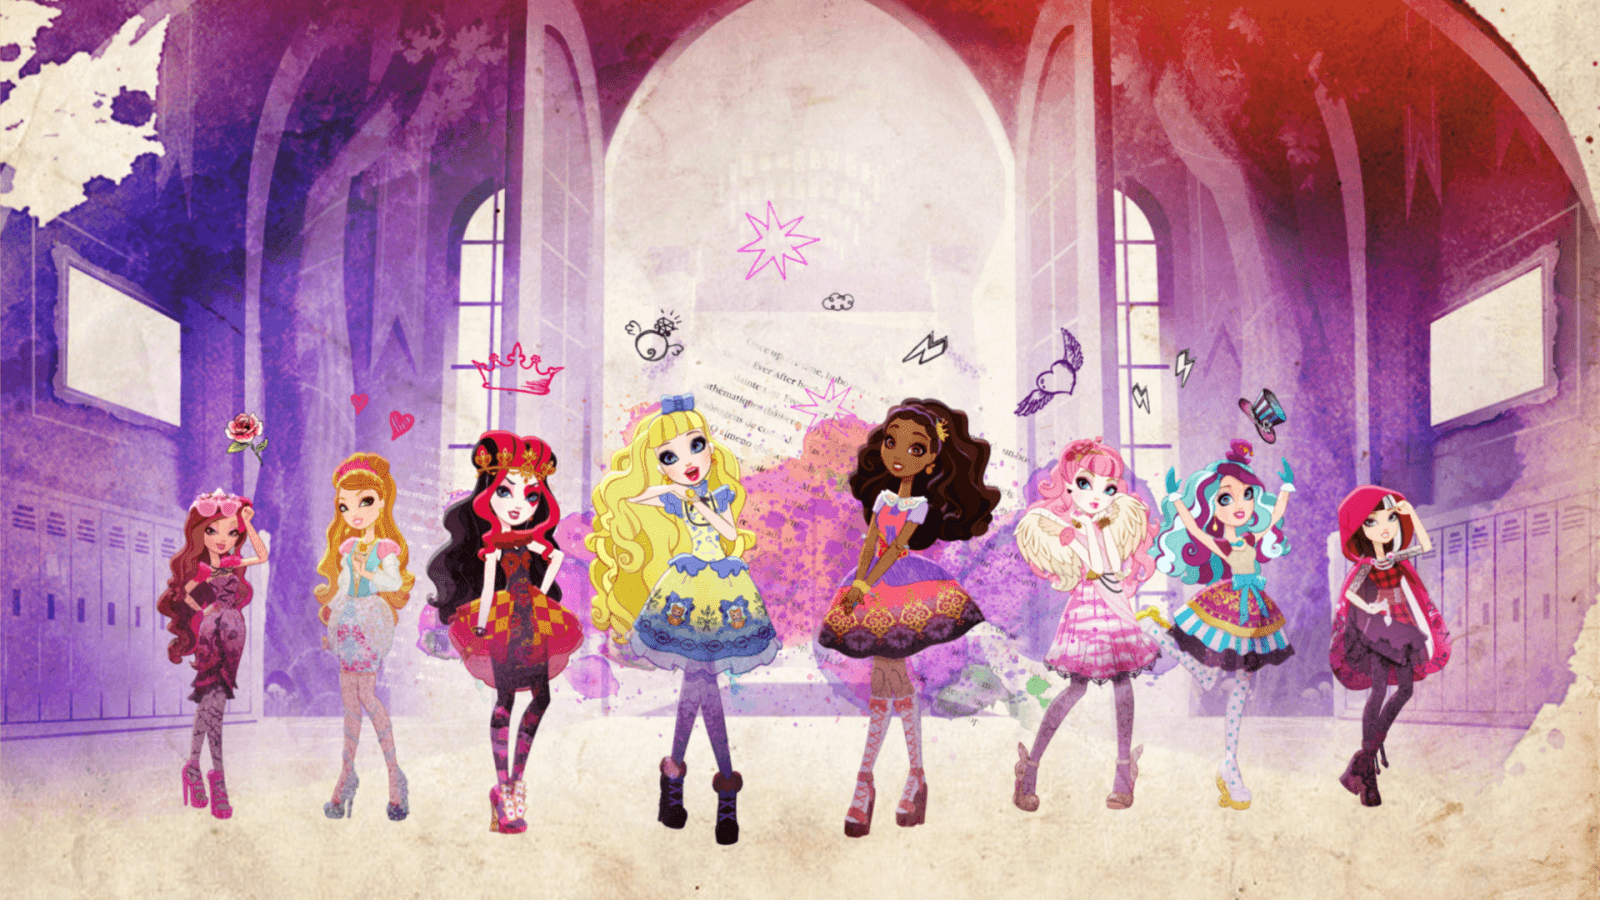 Best image about Ever after high. Hunters, Shoe